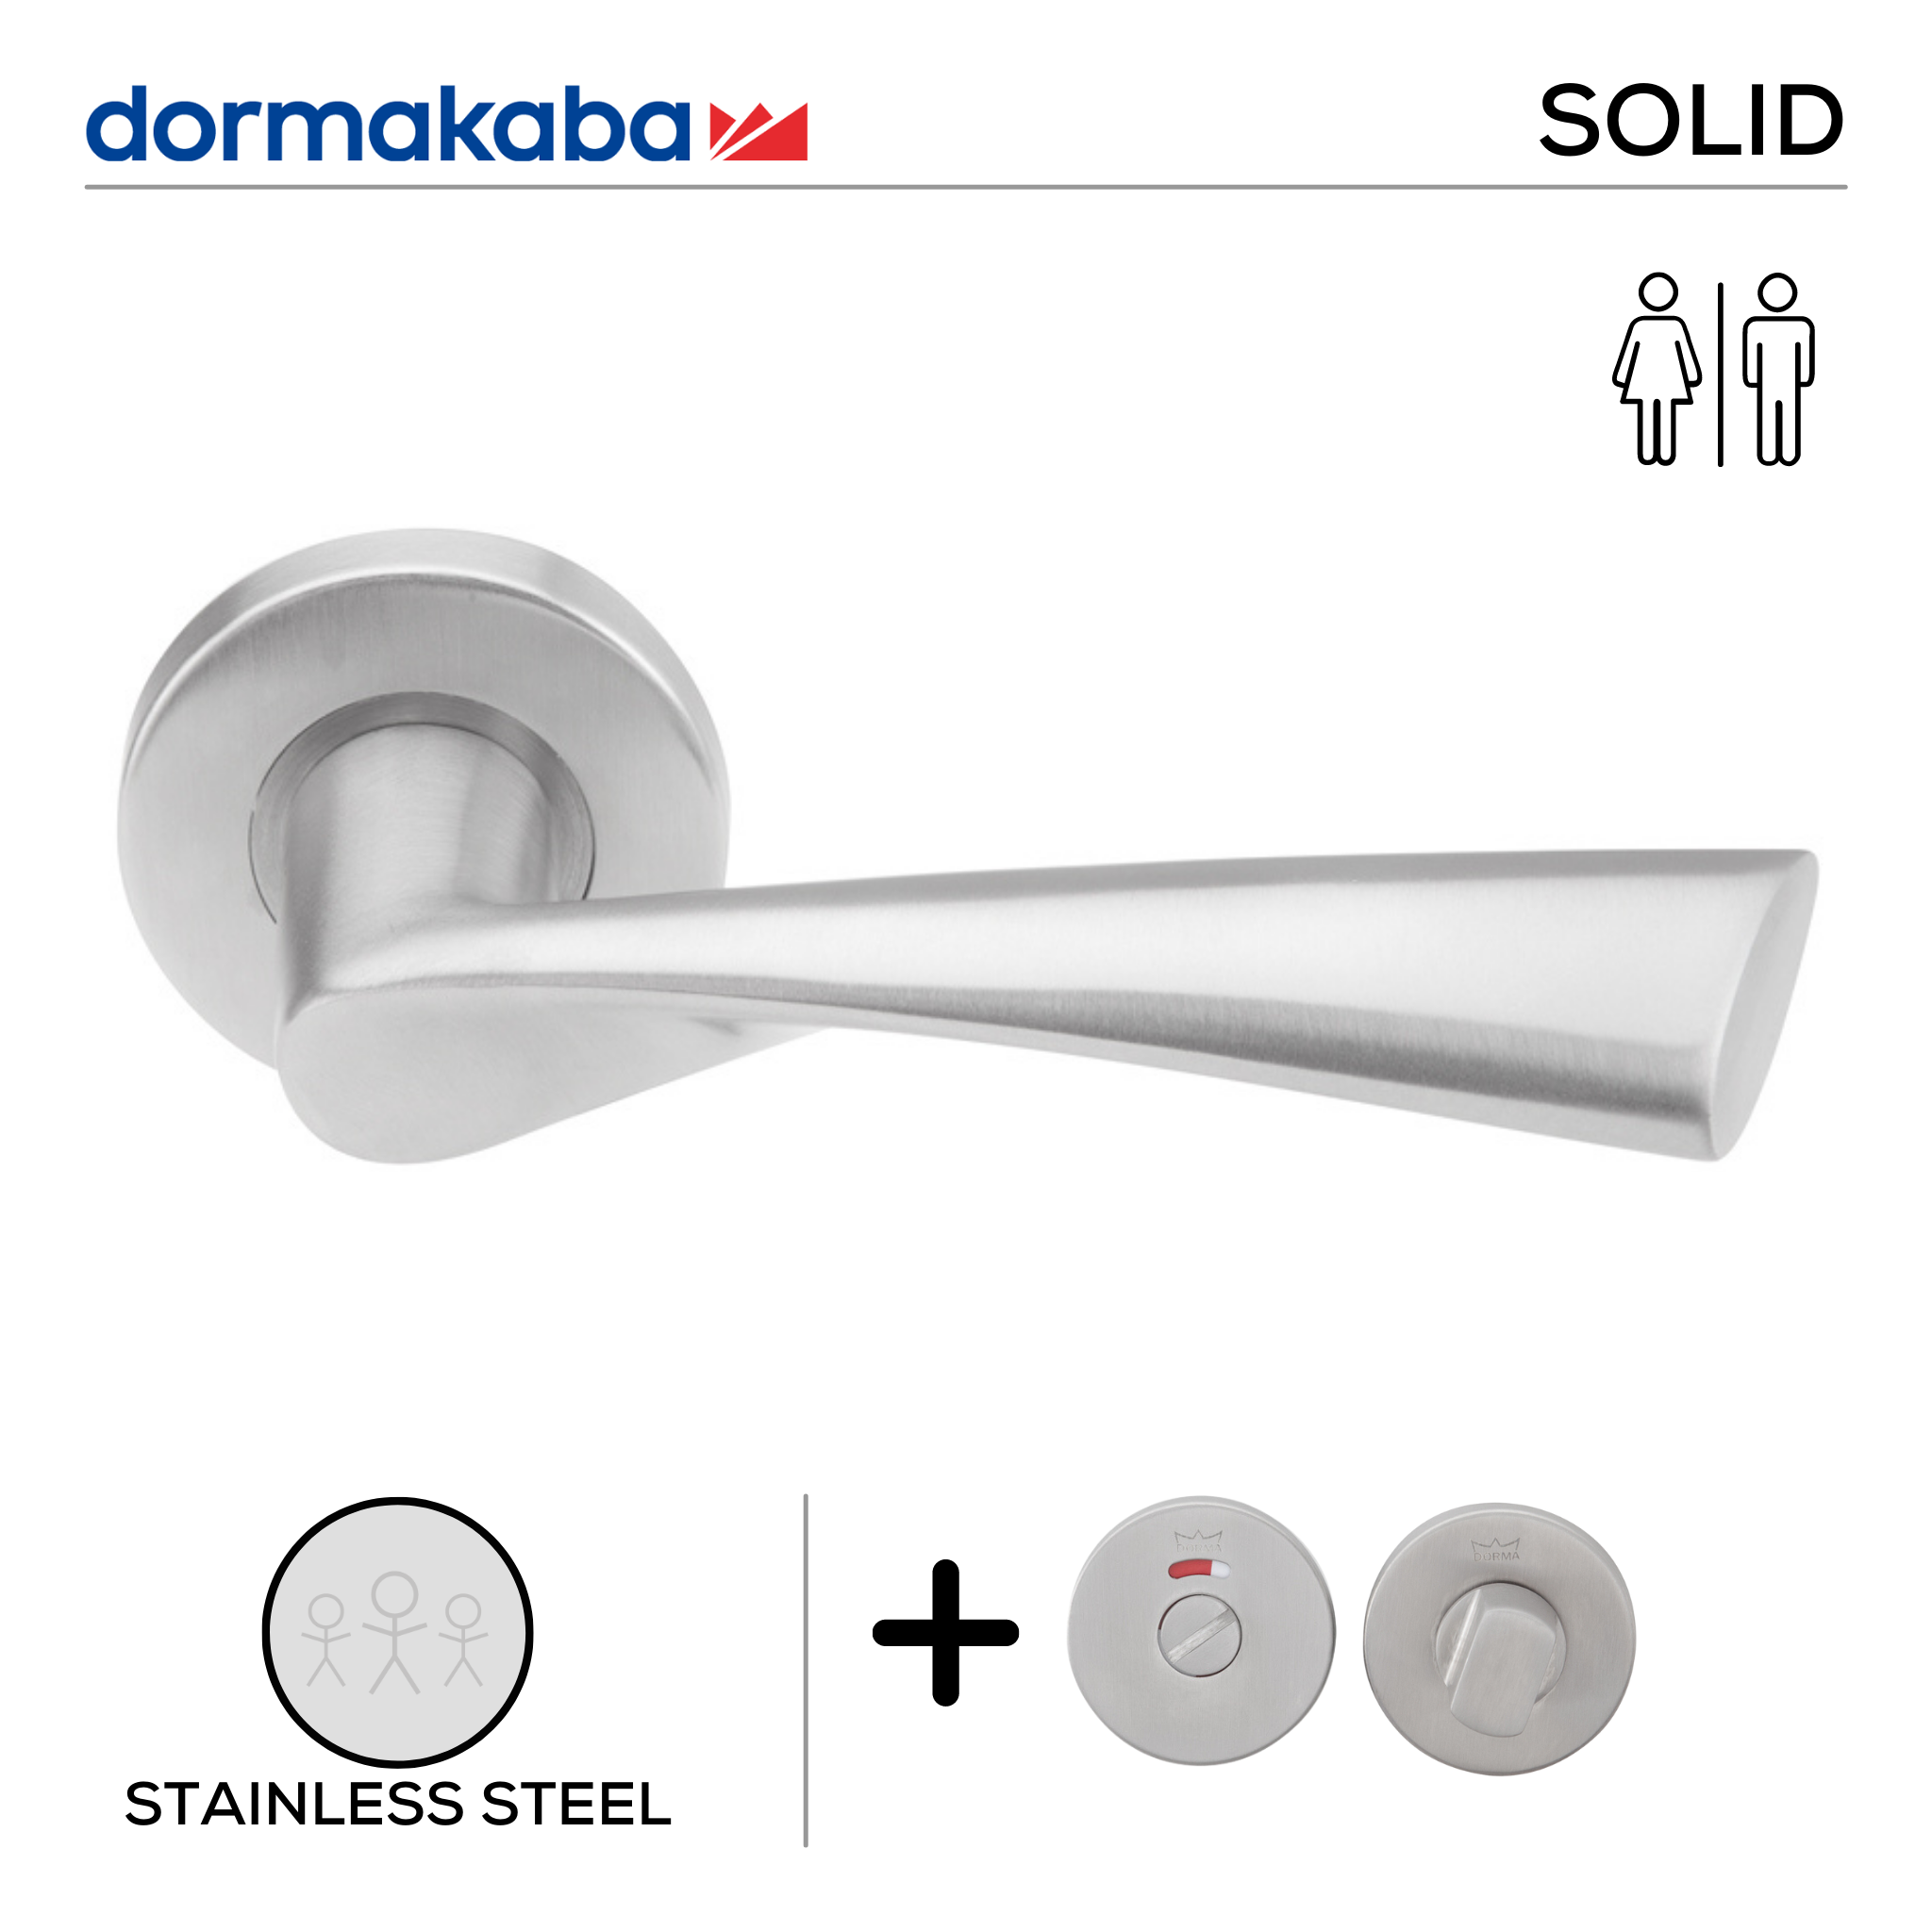 SH 815 Bathroom W/C, Lever Handles, Solid, On Round Rose, With Bathroom (WC) Indicator Set - DWC 005, 139mm (l), Stainless Steel, DORMAKABA